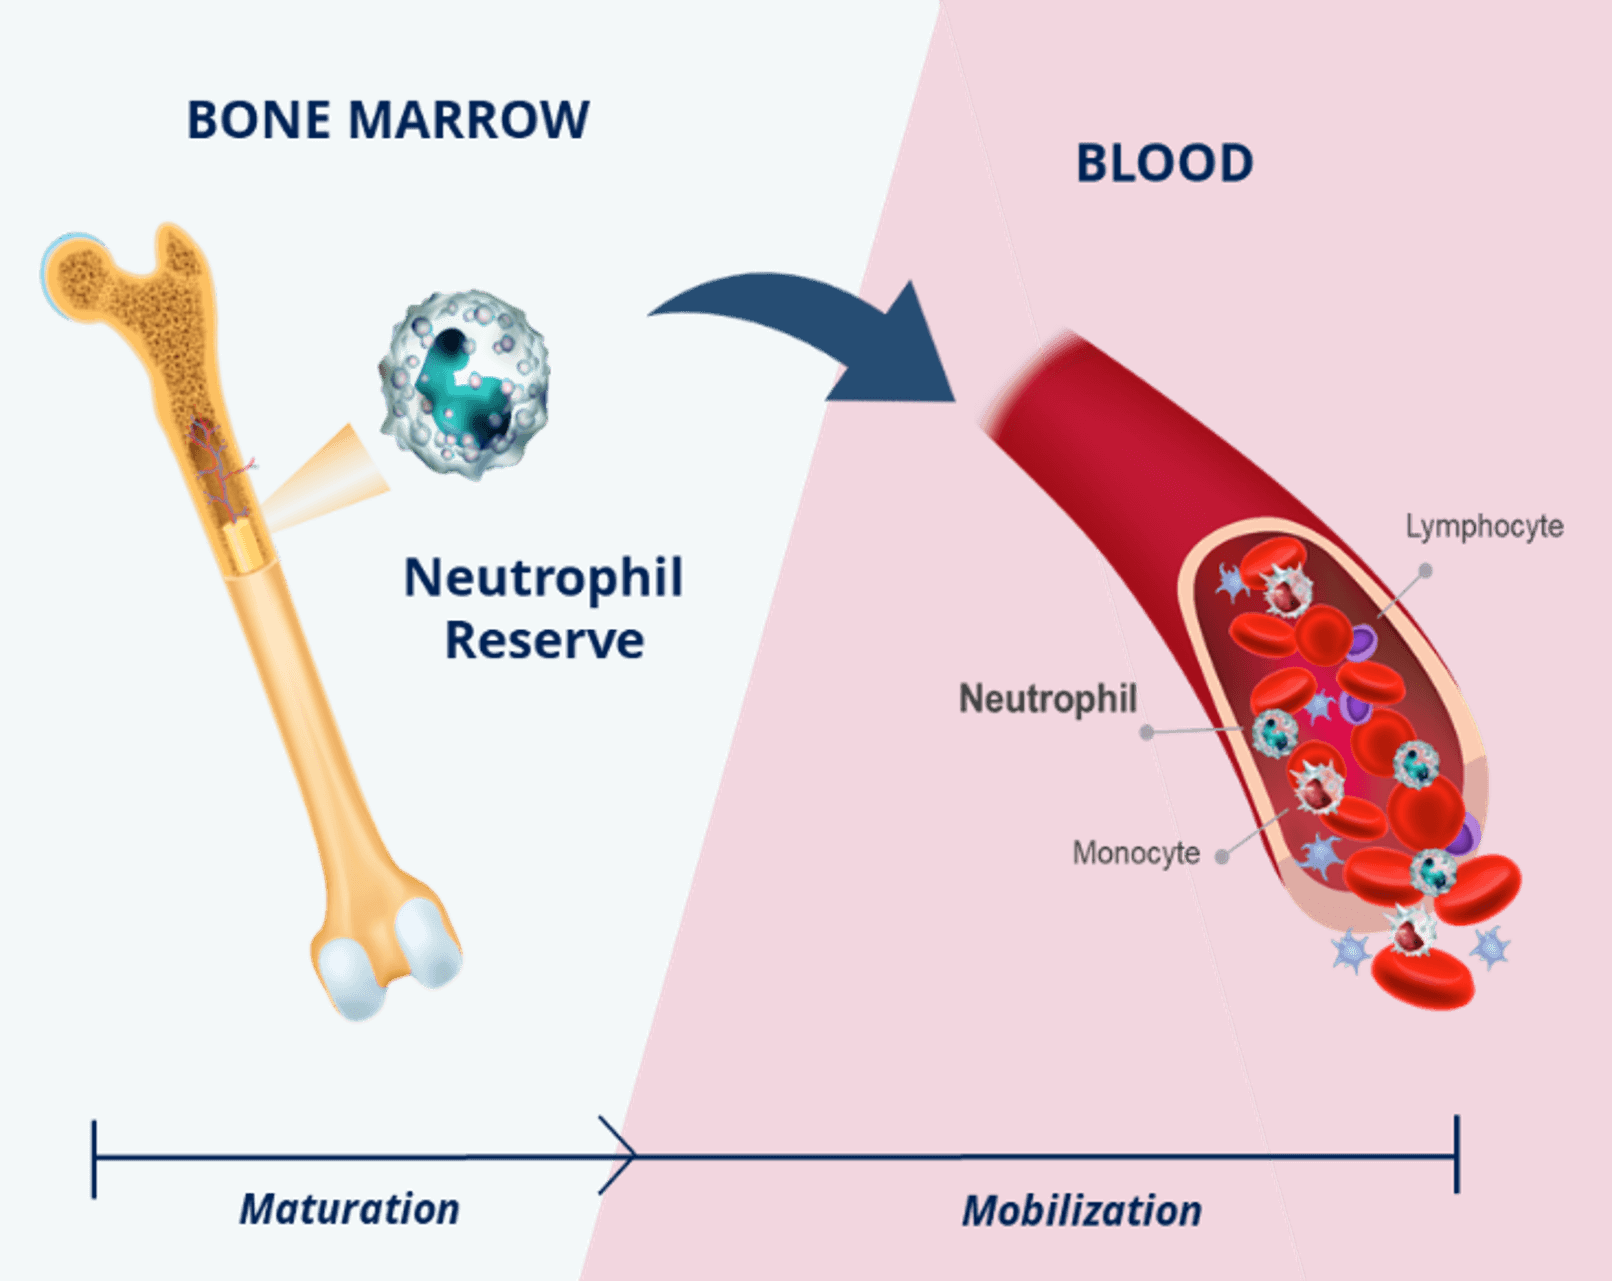 Image depicts the flow of white blood cells from the bone marrow (on the left) into the bloodstream (on the right). Image also depicts that there is a reserve of neutrophils in the bone marrow that mature and then mobilize into the blood along with lymphocytes and monocytes.